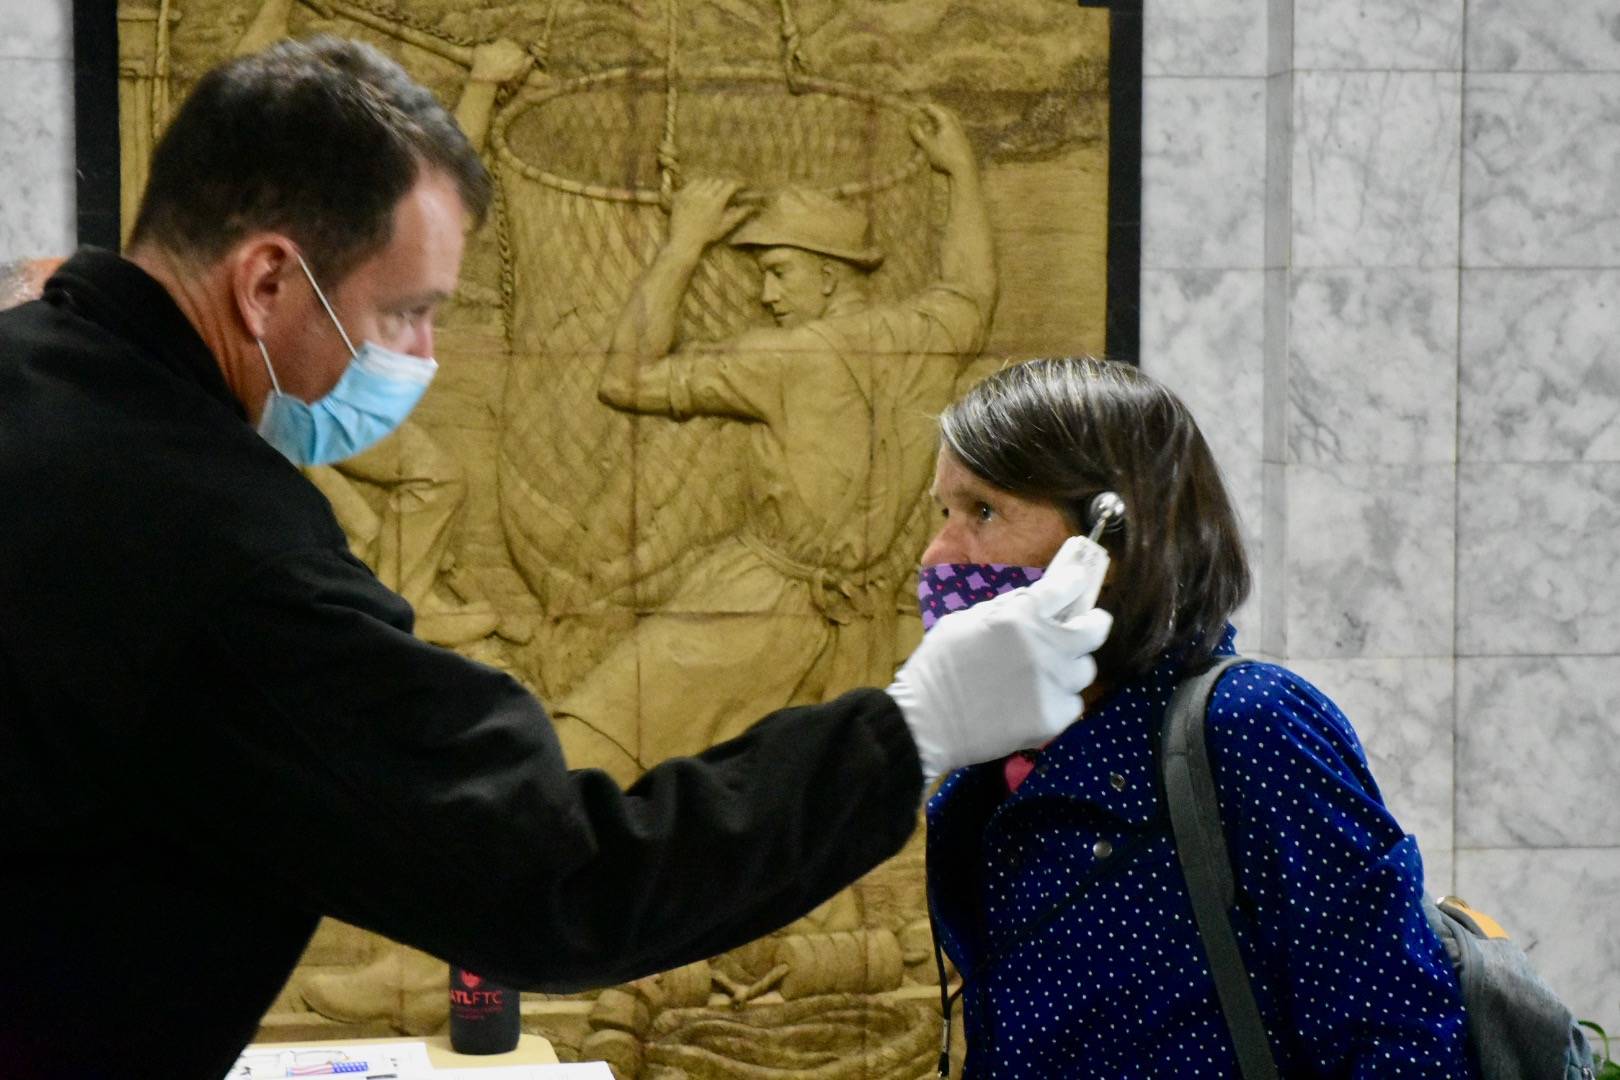 Peter Segall / Juneau Empire File
Rep. Jennifer Johnston, R-Anchorage, gets her temperature taken as she enters the Alaska State Capitol on Monday, May 18, 2020. New policies will require all staff and legislators to wear masks in chambers.